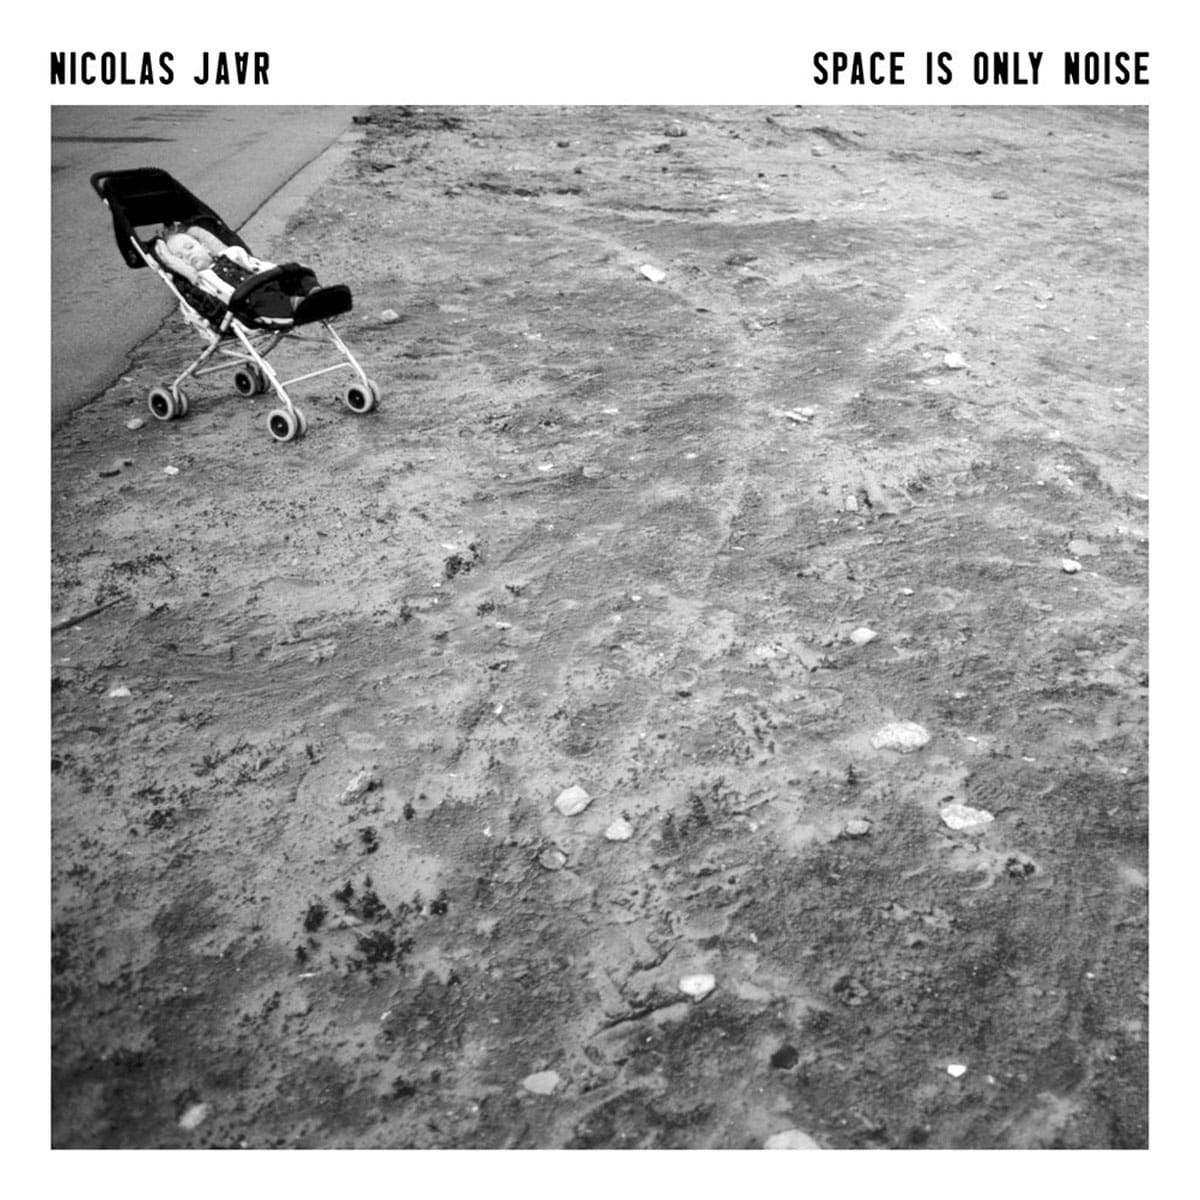 Space Is Only Noise" Albumcover (2011)